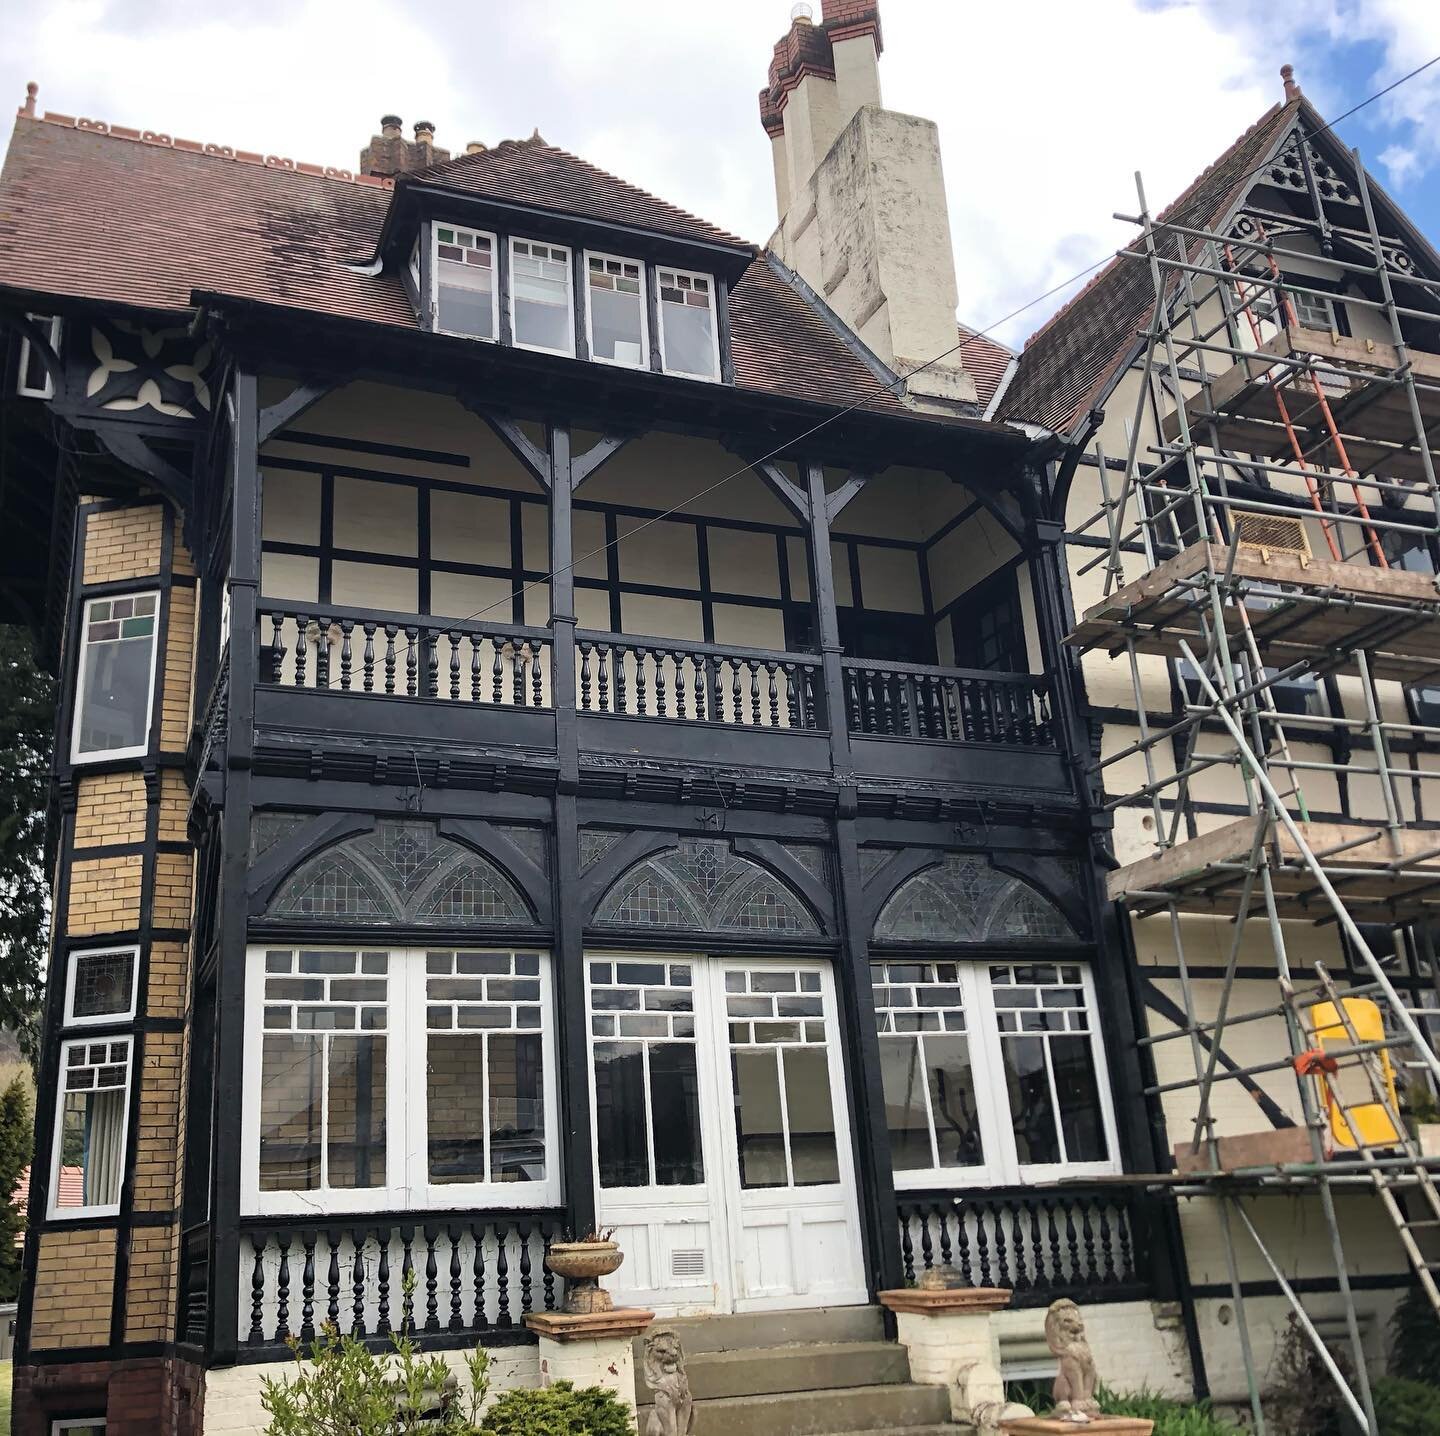 Such an exciting, unusual and challenging property visited this afternoon. More thorough structural investigation needed to work out how best to repair this beautiful grade II listed Victorian house. #listedbuilding #mocktudor #structuralengineering